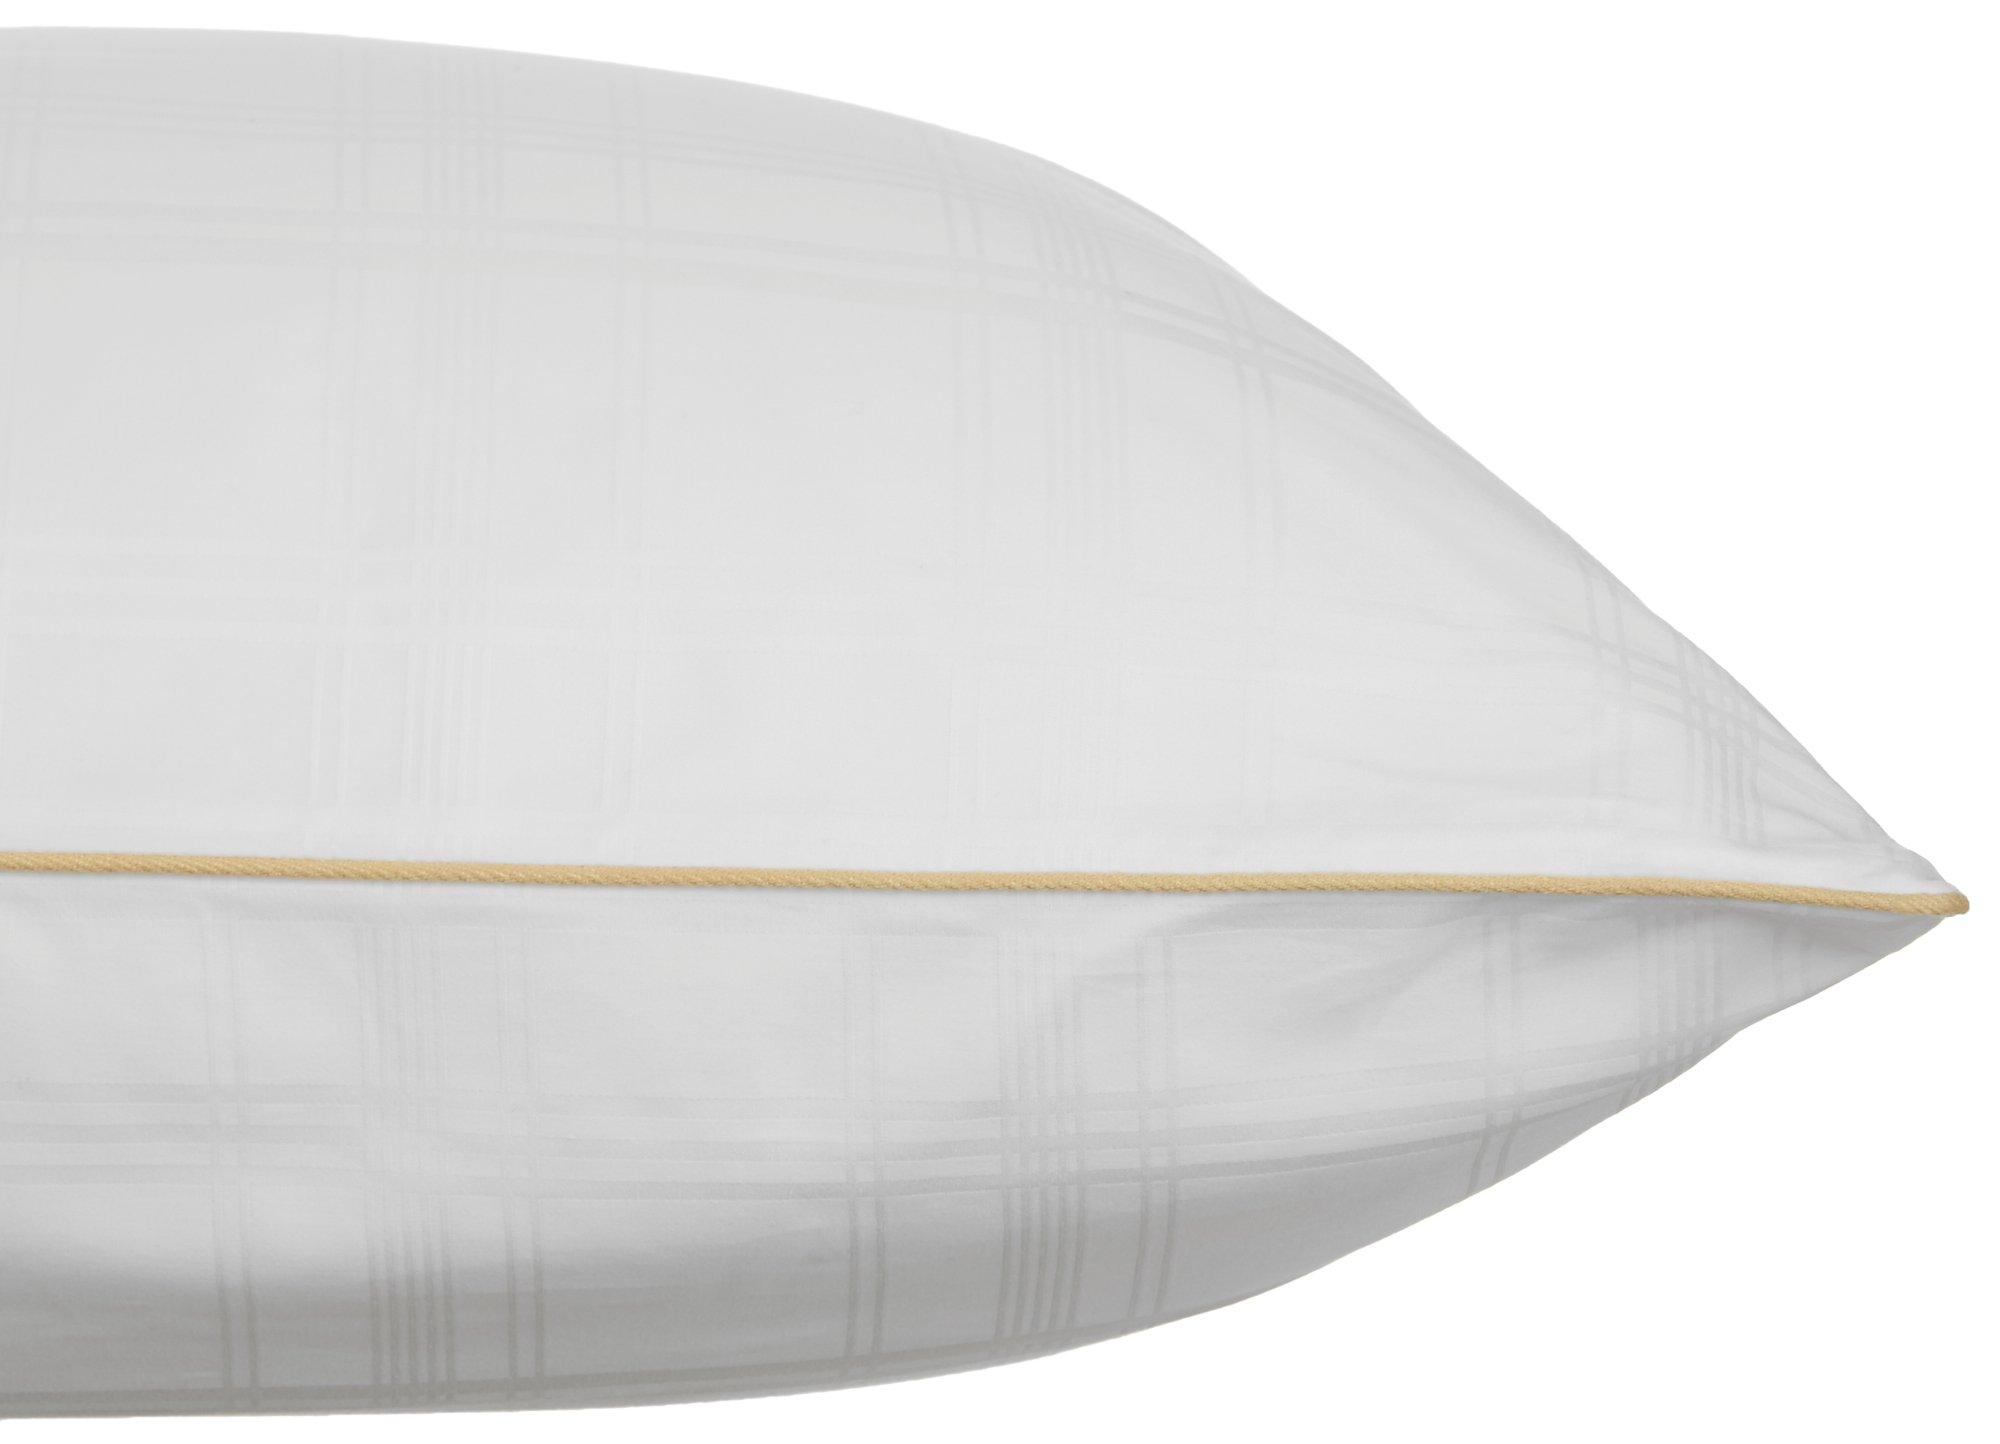 233 Thread Count Mini Feather Bed Pillow